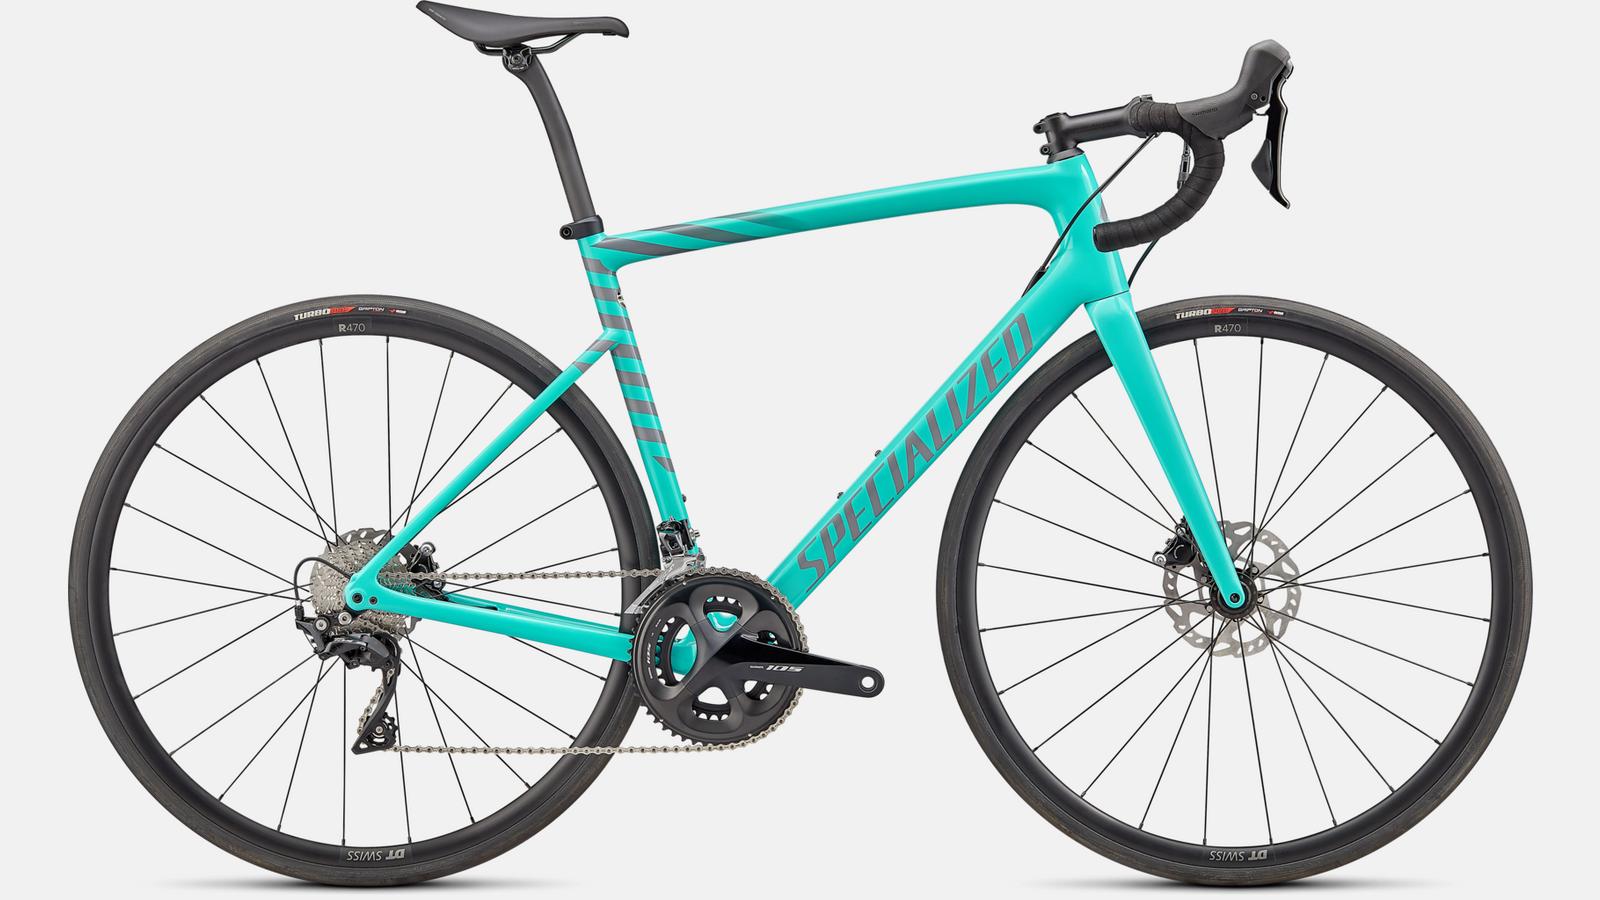 Paint for 2022 Specialized Tarmac SL6 Sport - Gloss Lagoon Blue